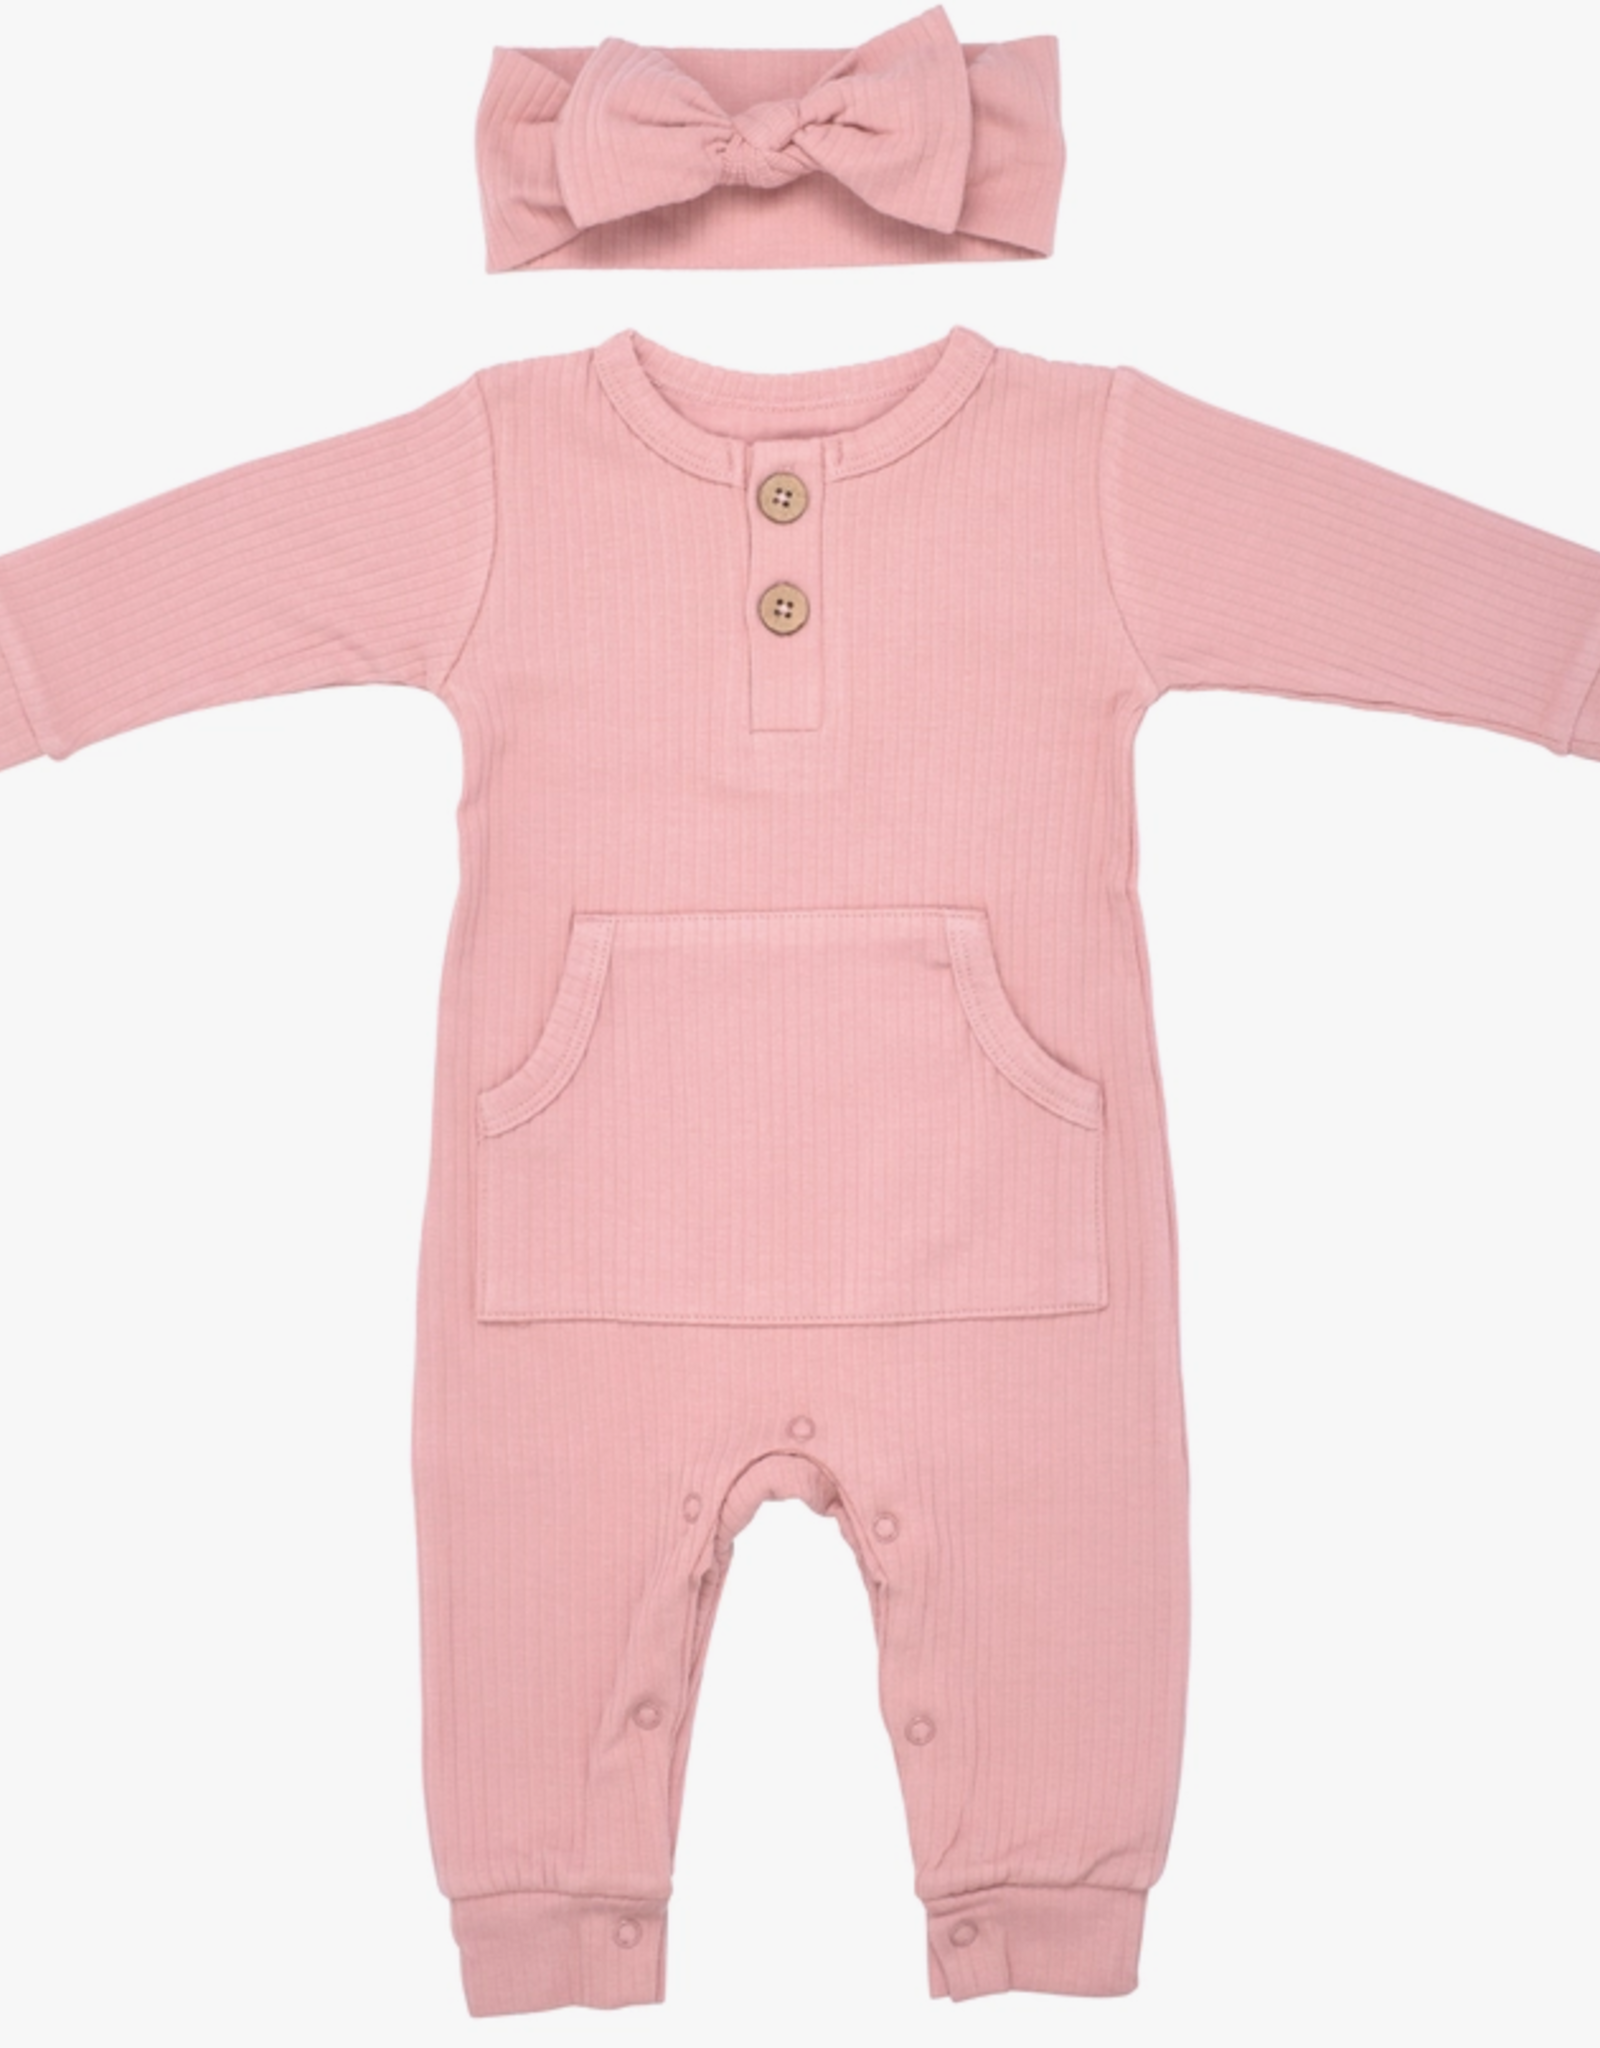 Three Little Tots Ribbed Playsuit w/ Pockets & Bow, Dusty Rose